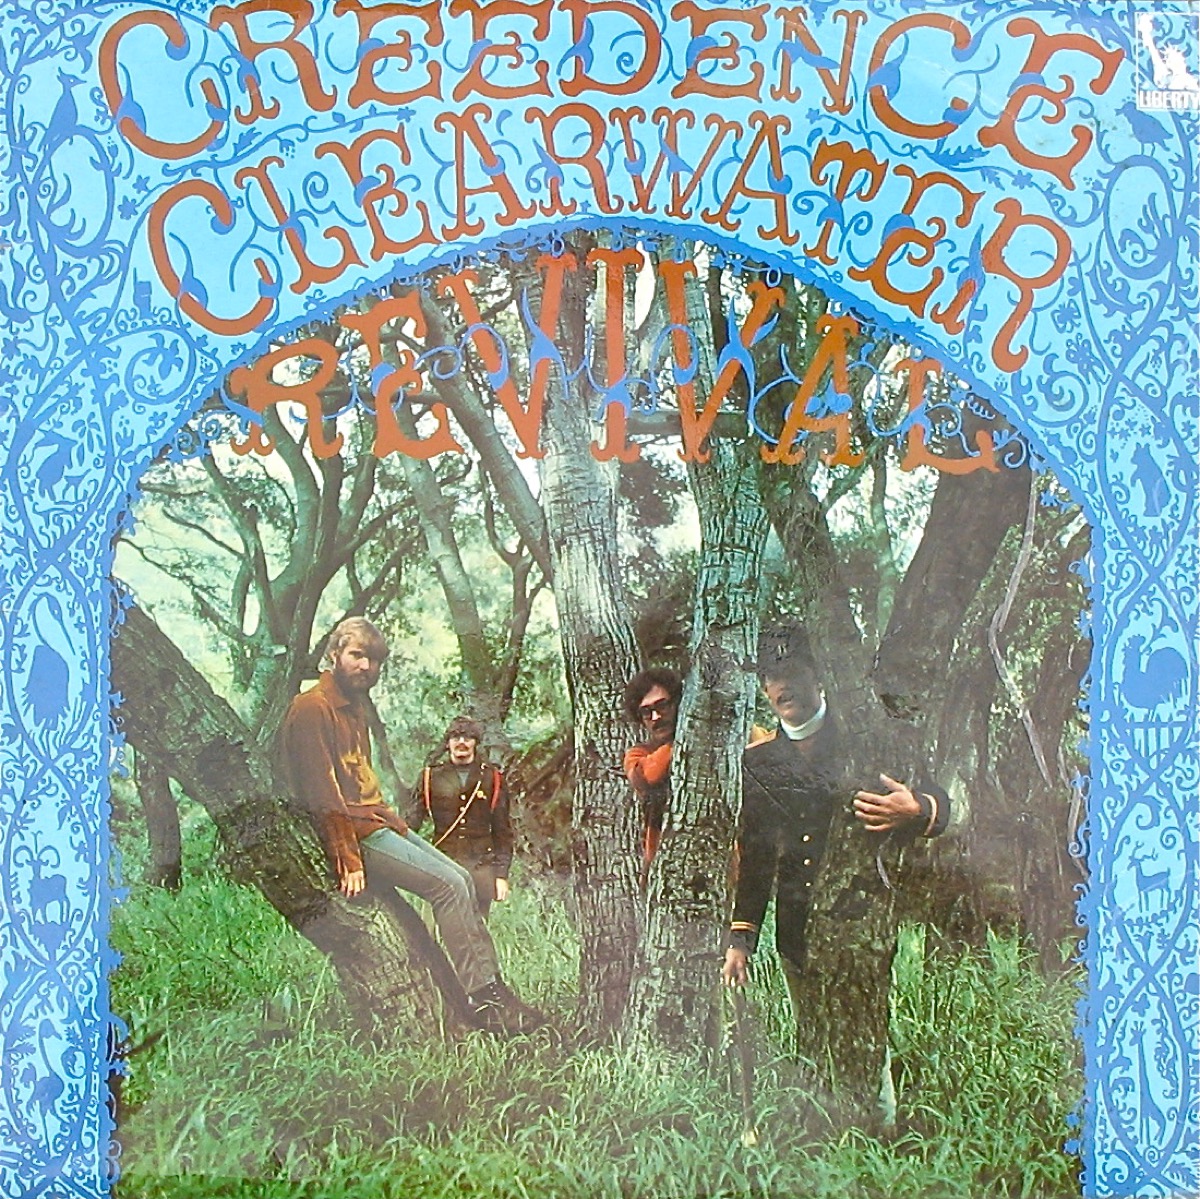 Creedence Clearwater Revival Debut Album Cover